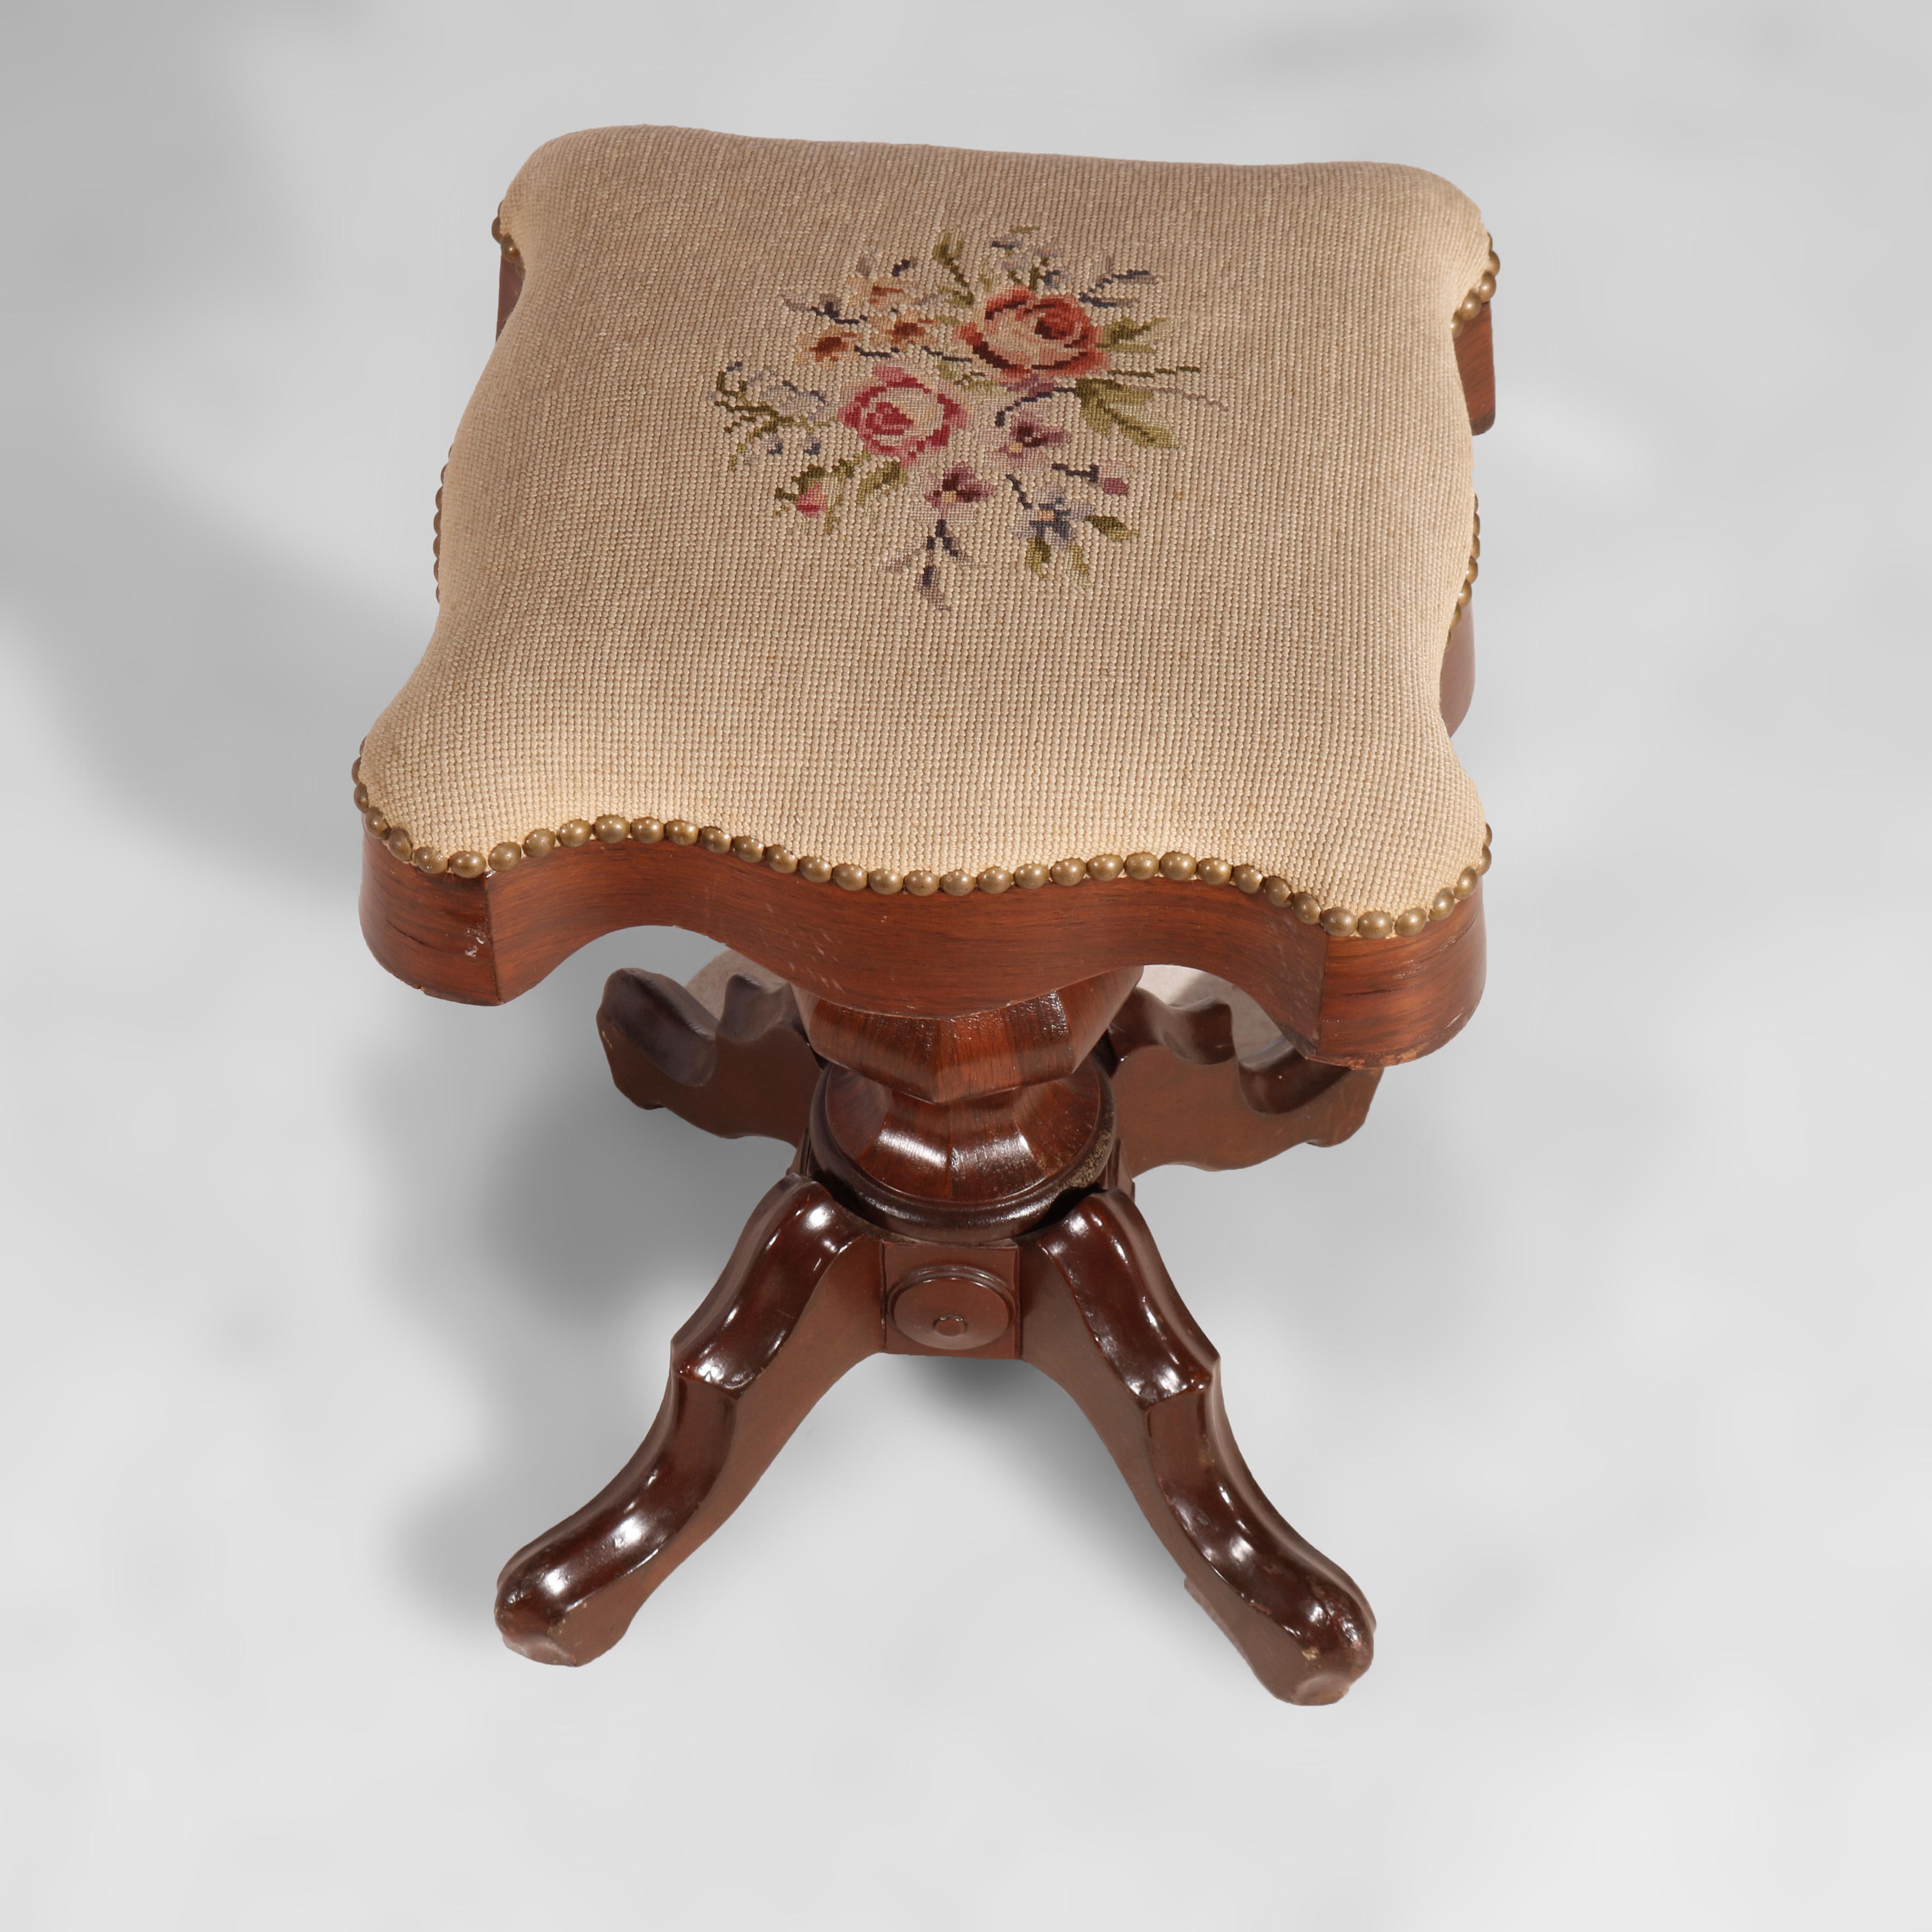 An antique Victorian piano stool offers shaped seat with floral needlepoint upholstery over rosewood bae having faceted urn form pedestal with four cabriole legs, circa 1880

Measures - 20.25